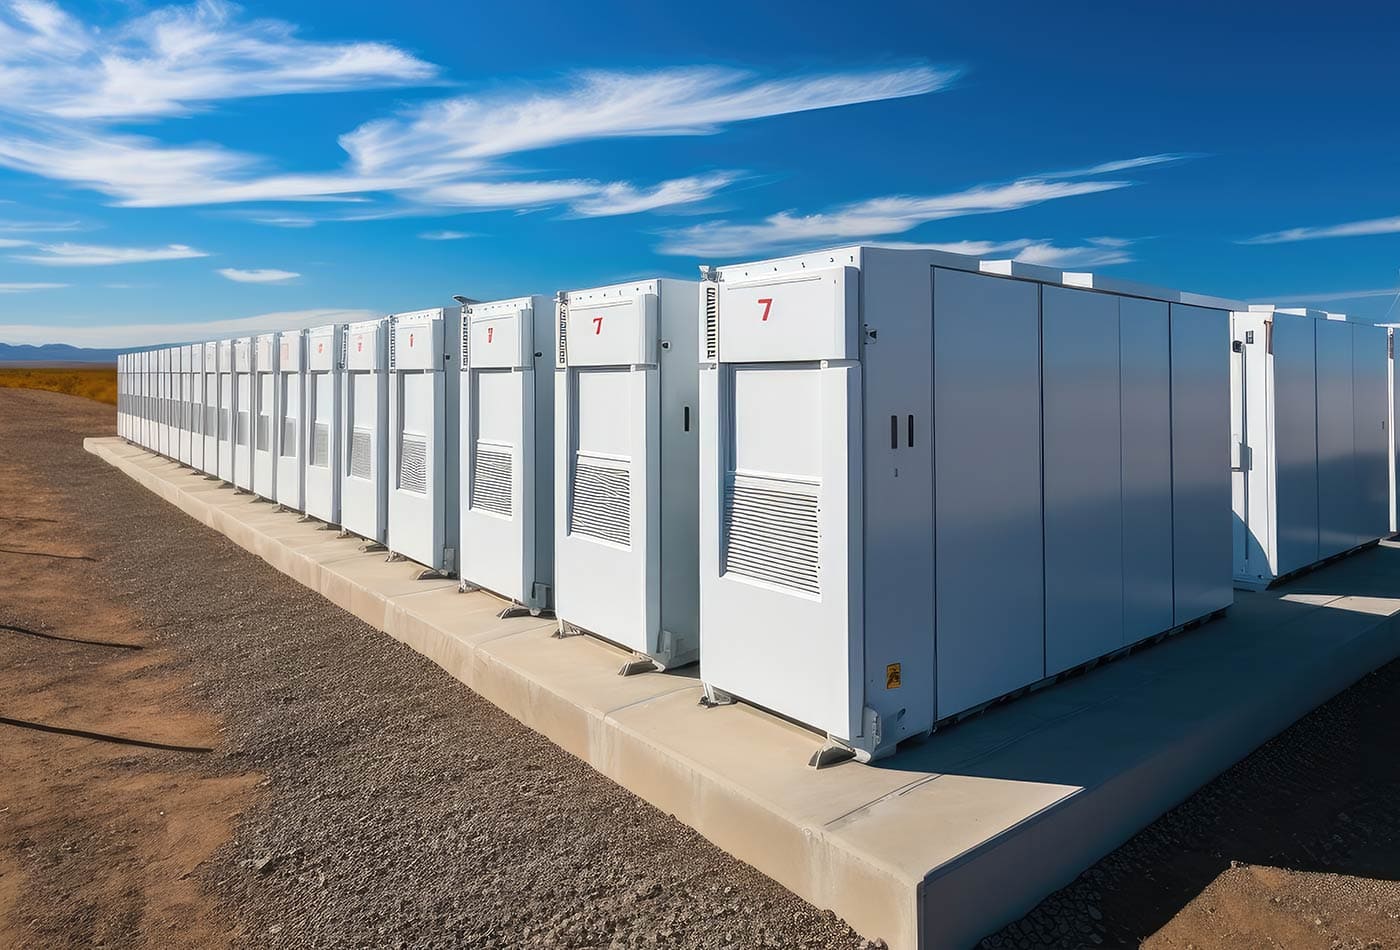 Array Of Large Industrial Batteries Set Against A Clear Blue Sky, Providing Energy Storage Solutions In A Remote Location.